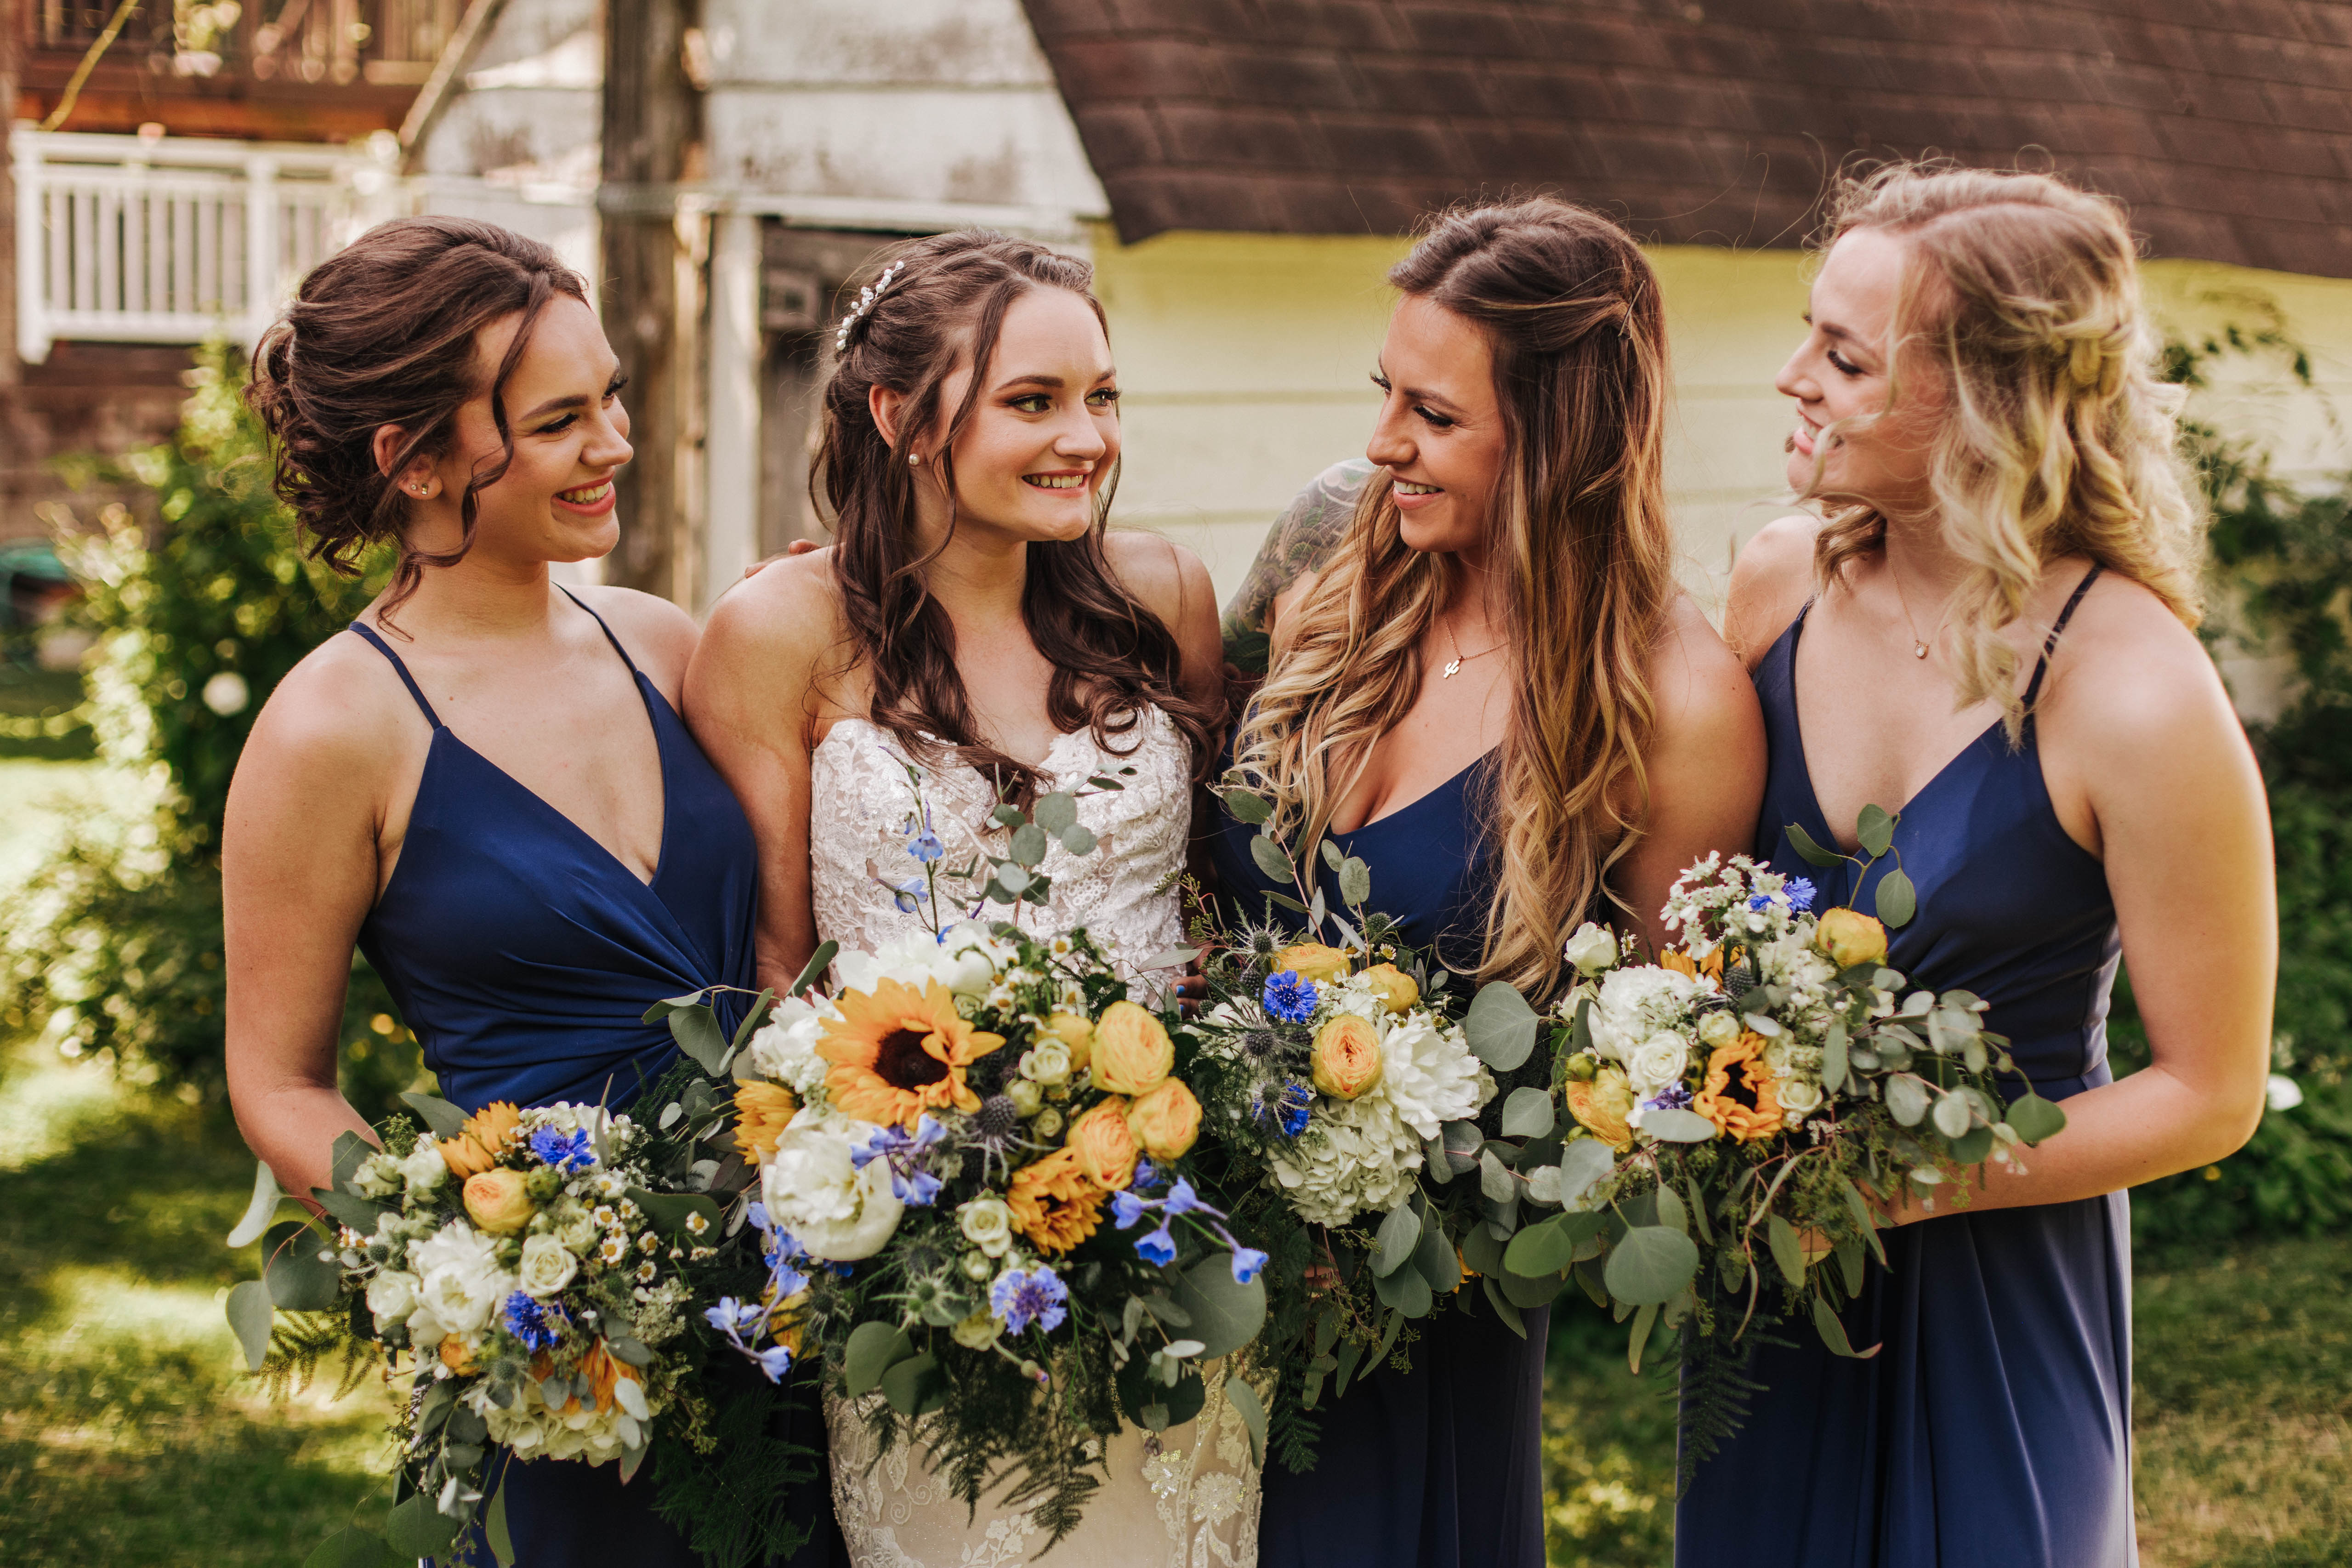 Bride and three bridesmaids smiling towards each other. On-location wedding hairstyles by Elle Marie Hair Studio.